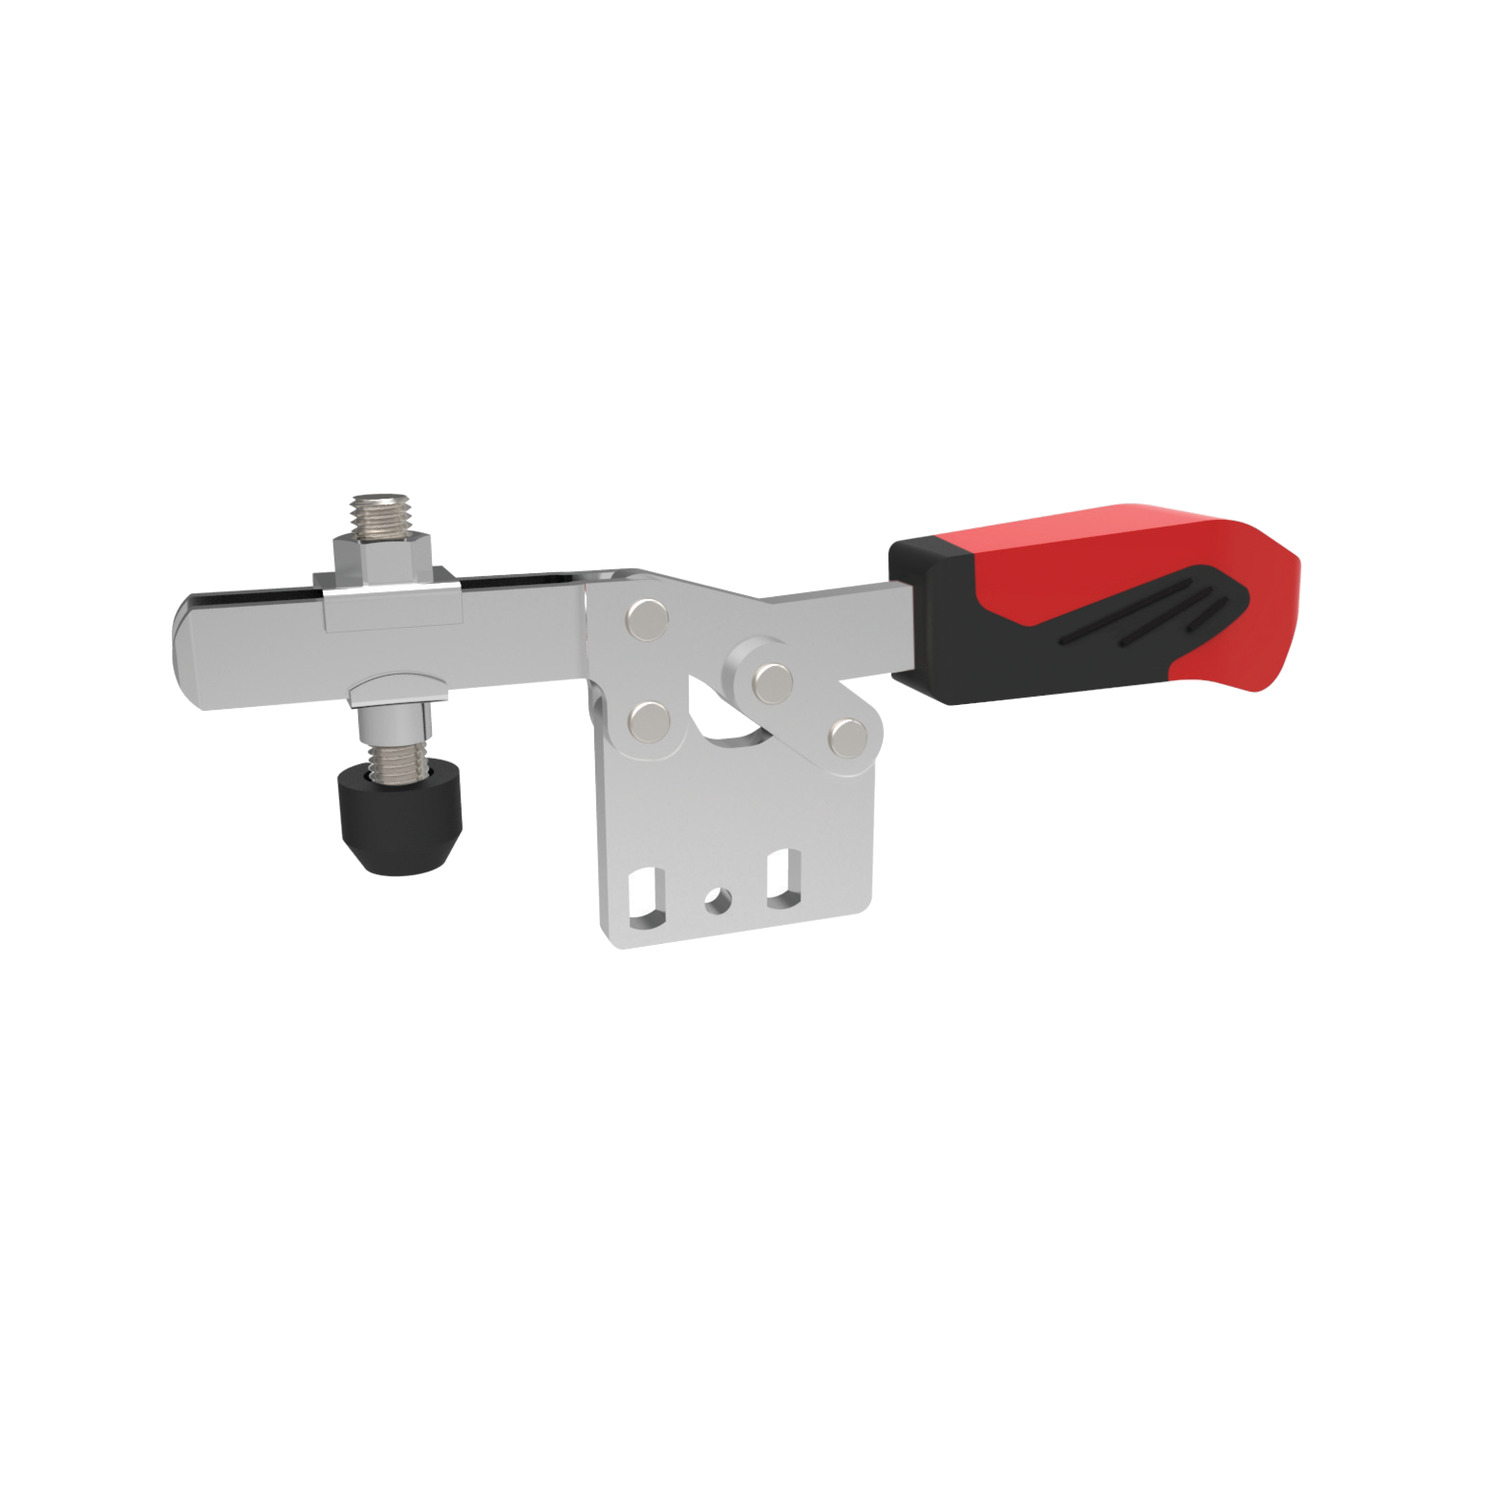 41050.W0000 Horizontal Acting Toggle Clamps Zinc plated steel - M 4x25